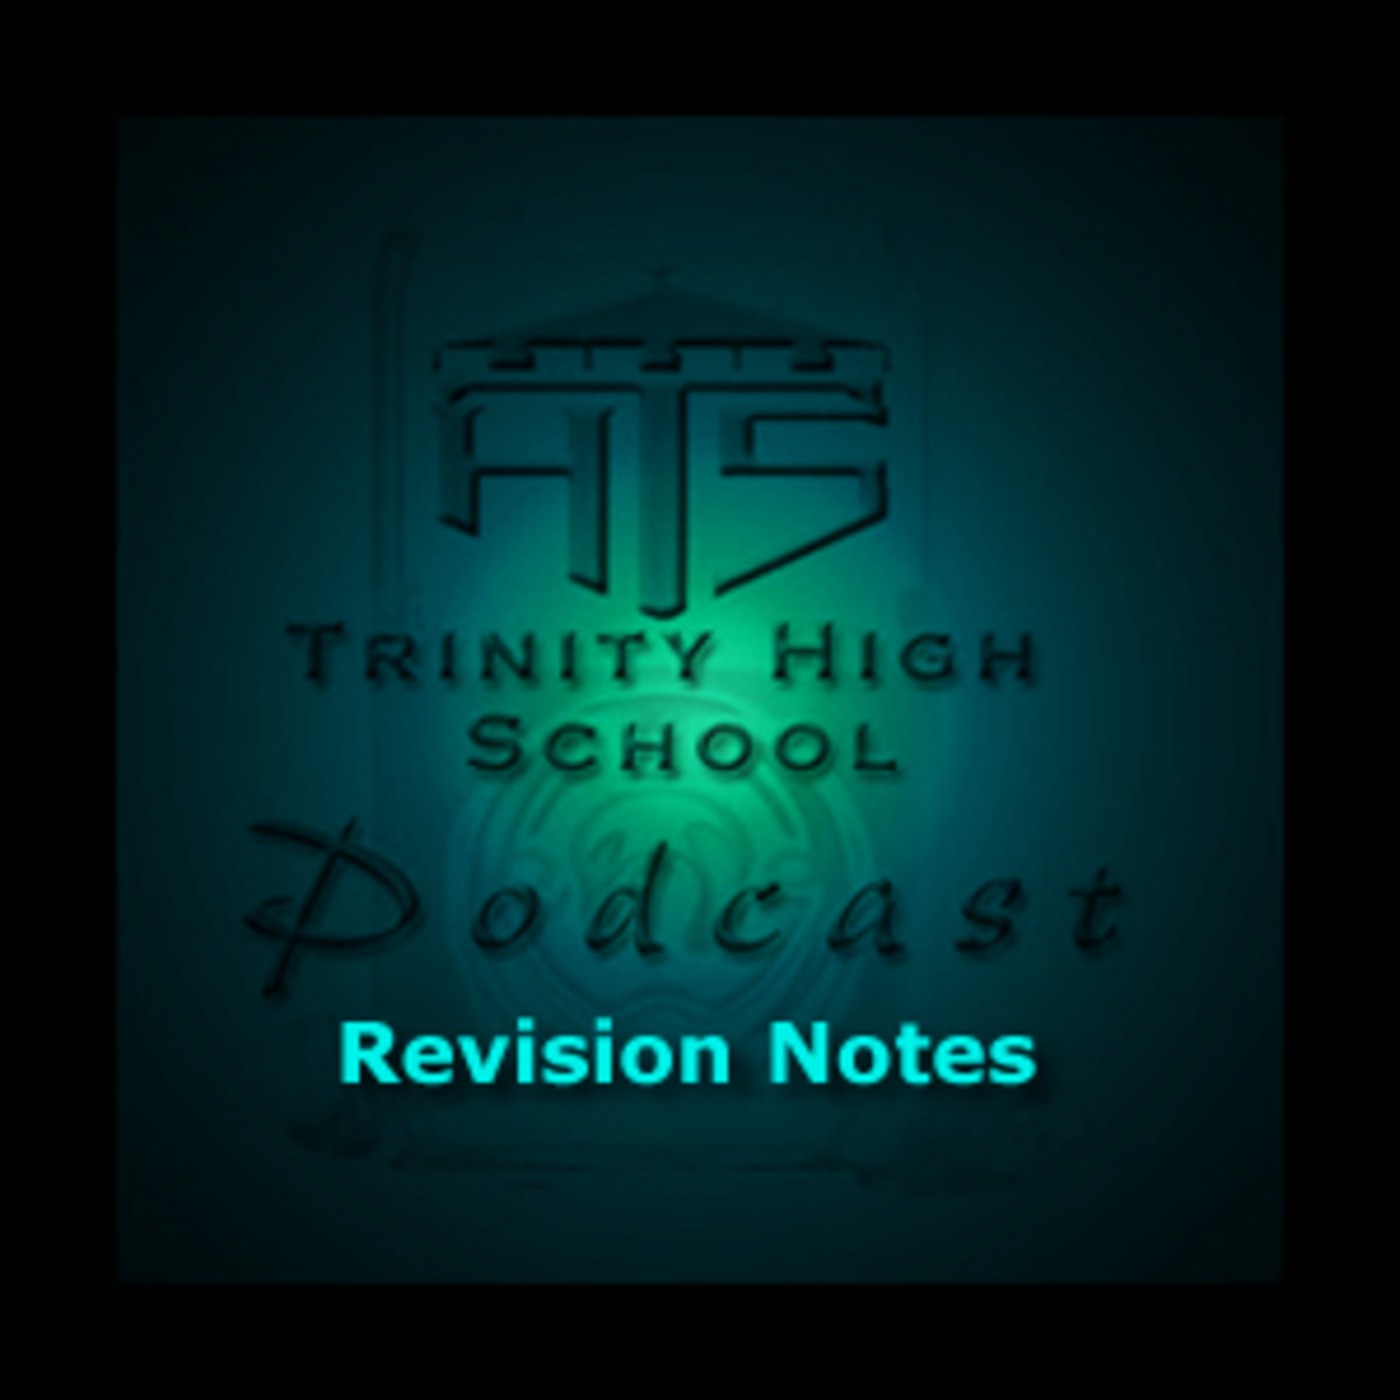 Trinity High School Revision Notes